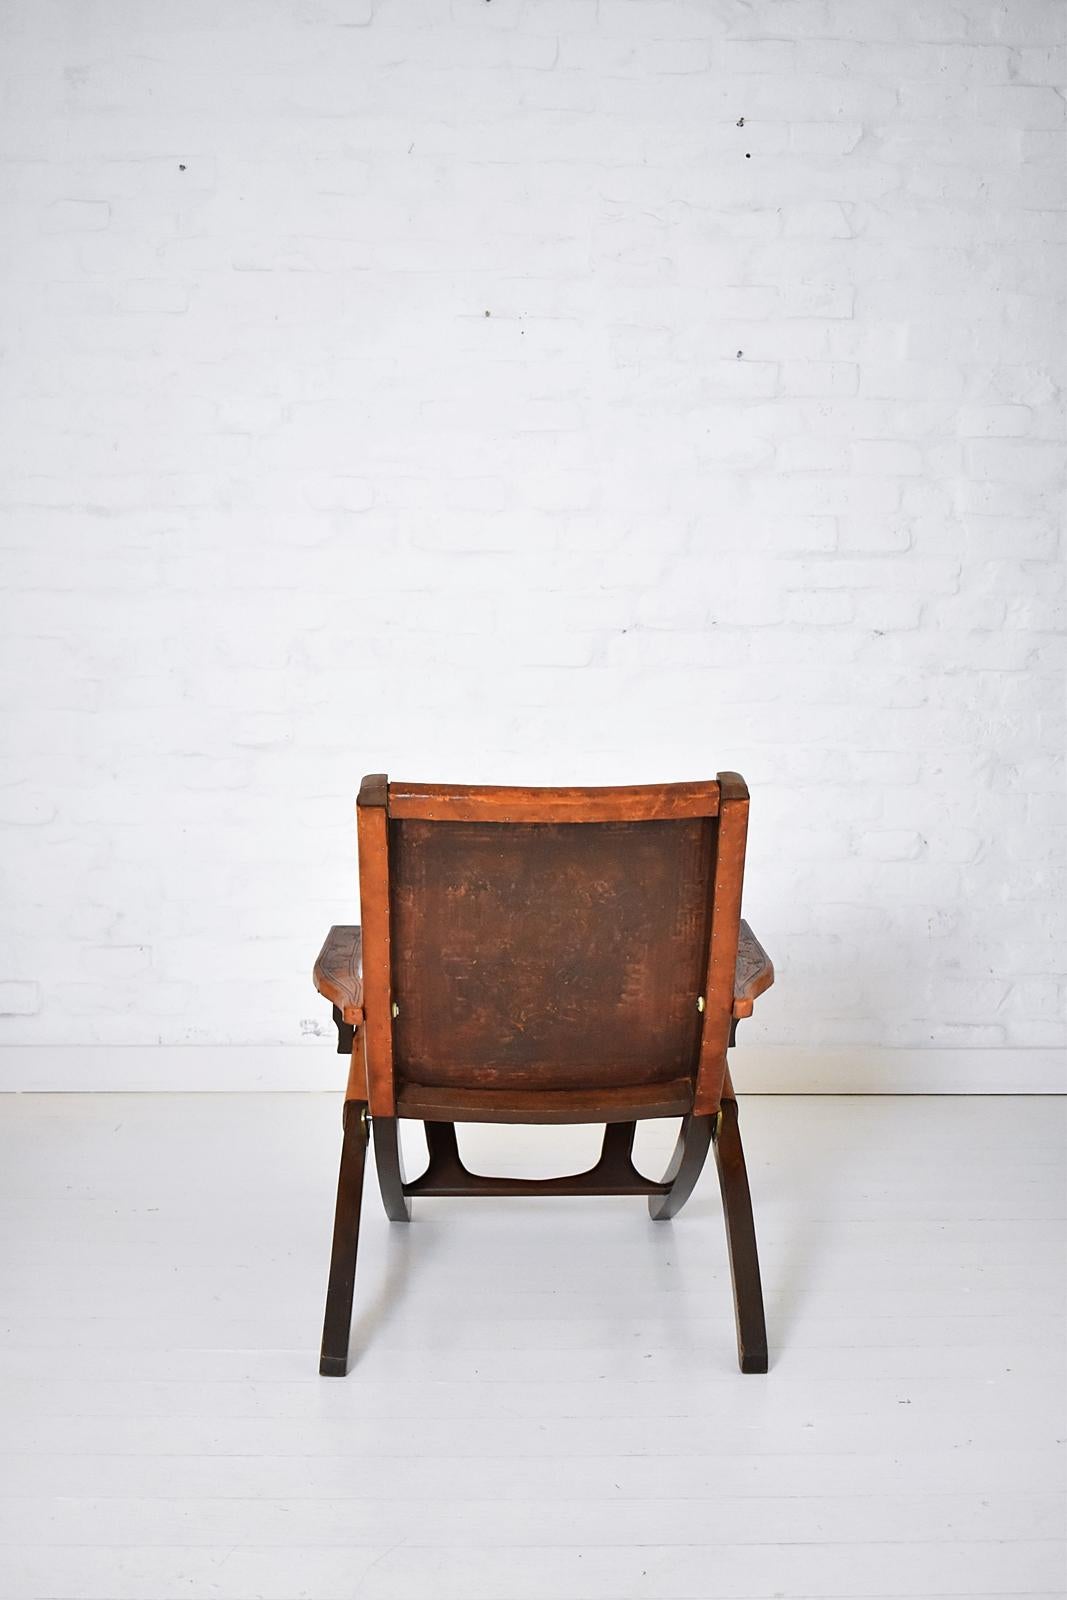 Hand-Crafted Mid-Century Modern Ecuadorian Wood and Leather Folding Chair by Angel Pazmino